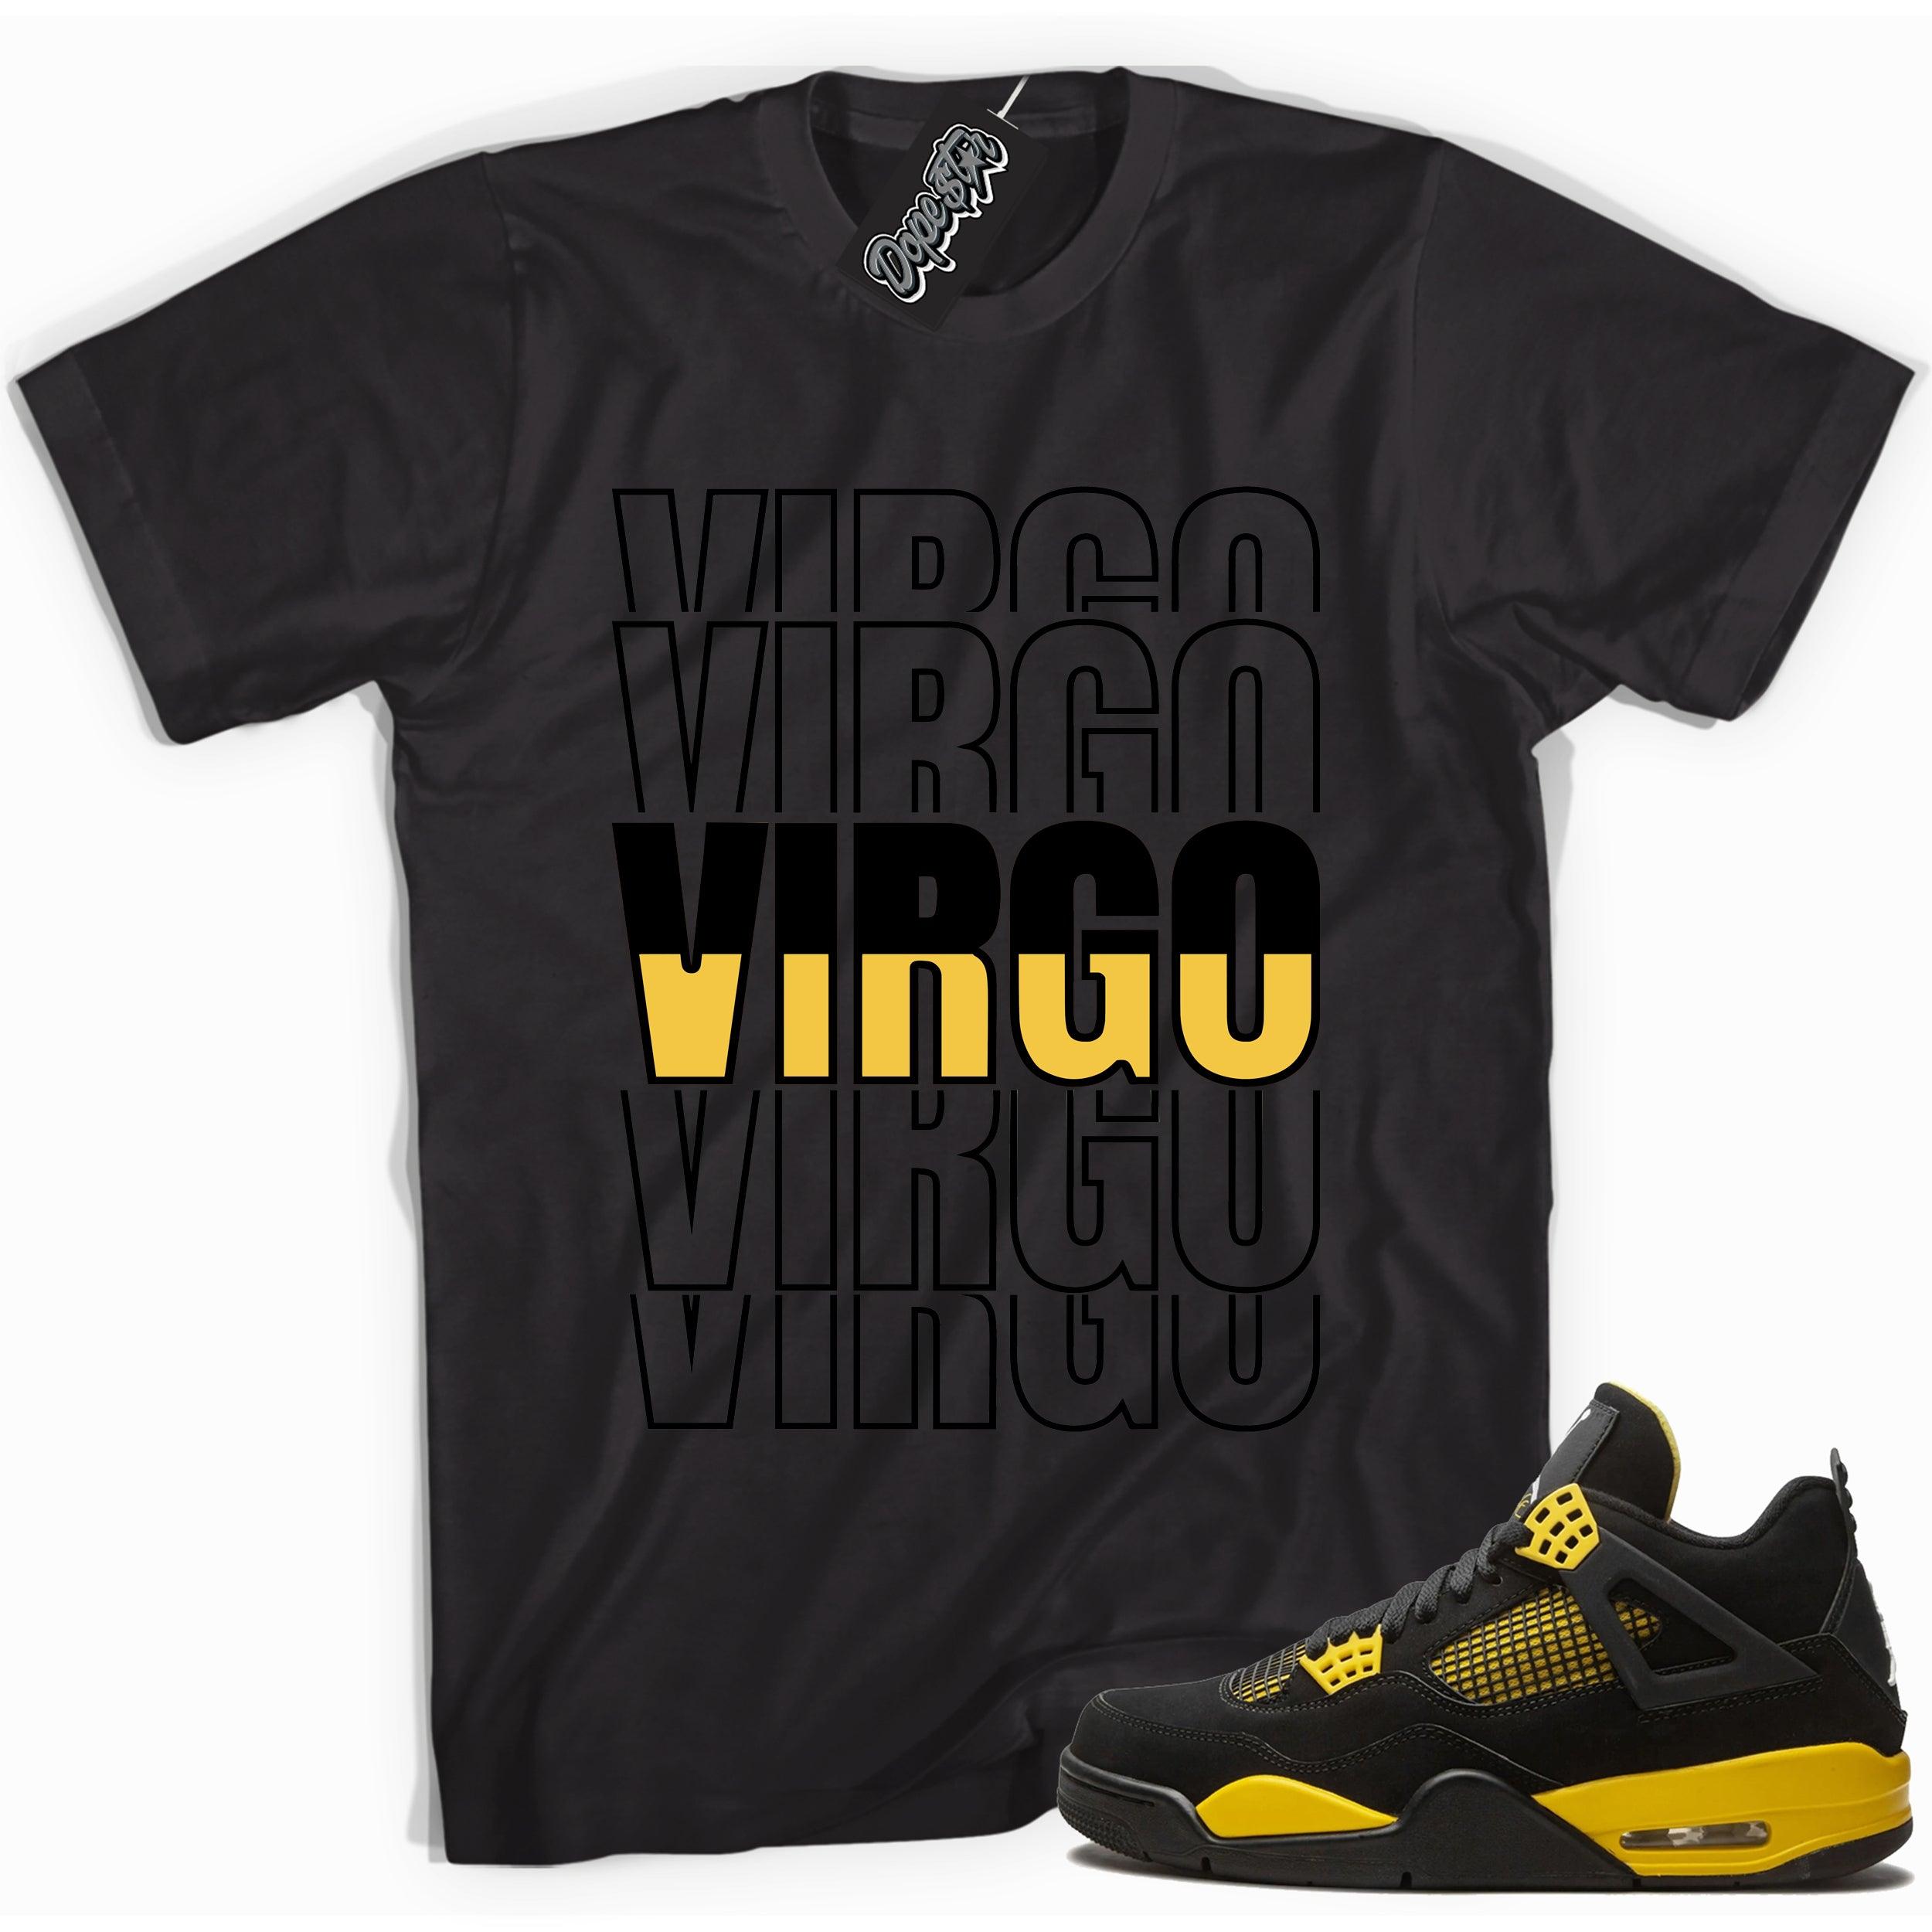 Cool black graphic tee with 'virgo' print, that perfectly matches  Air Jordan 4 Thunder sneakers